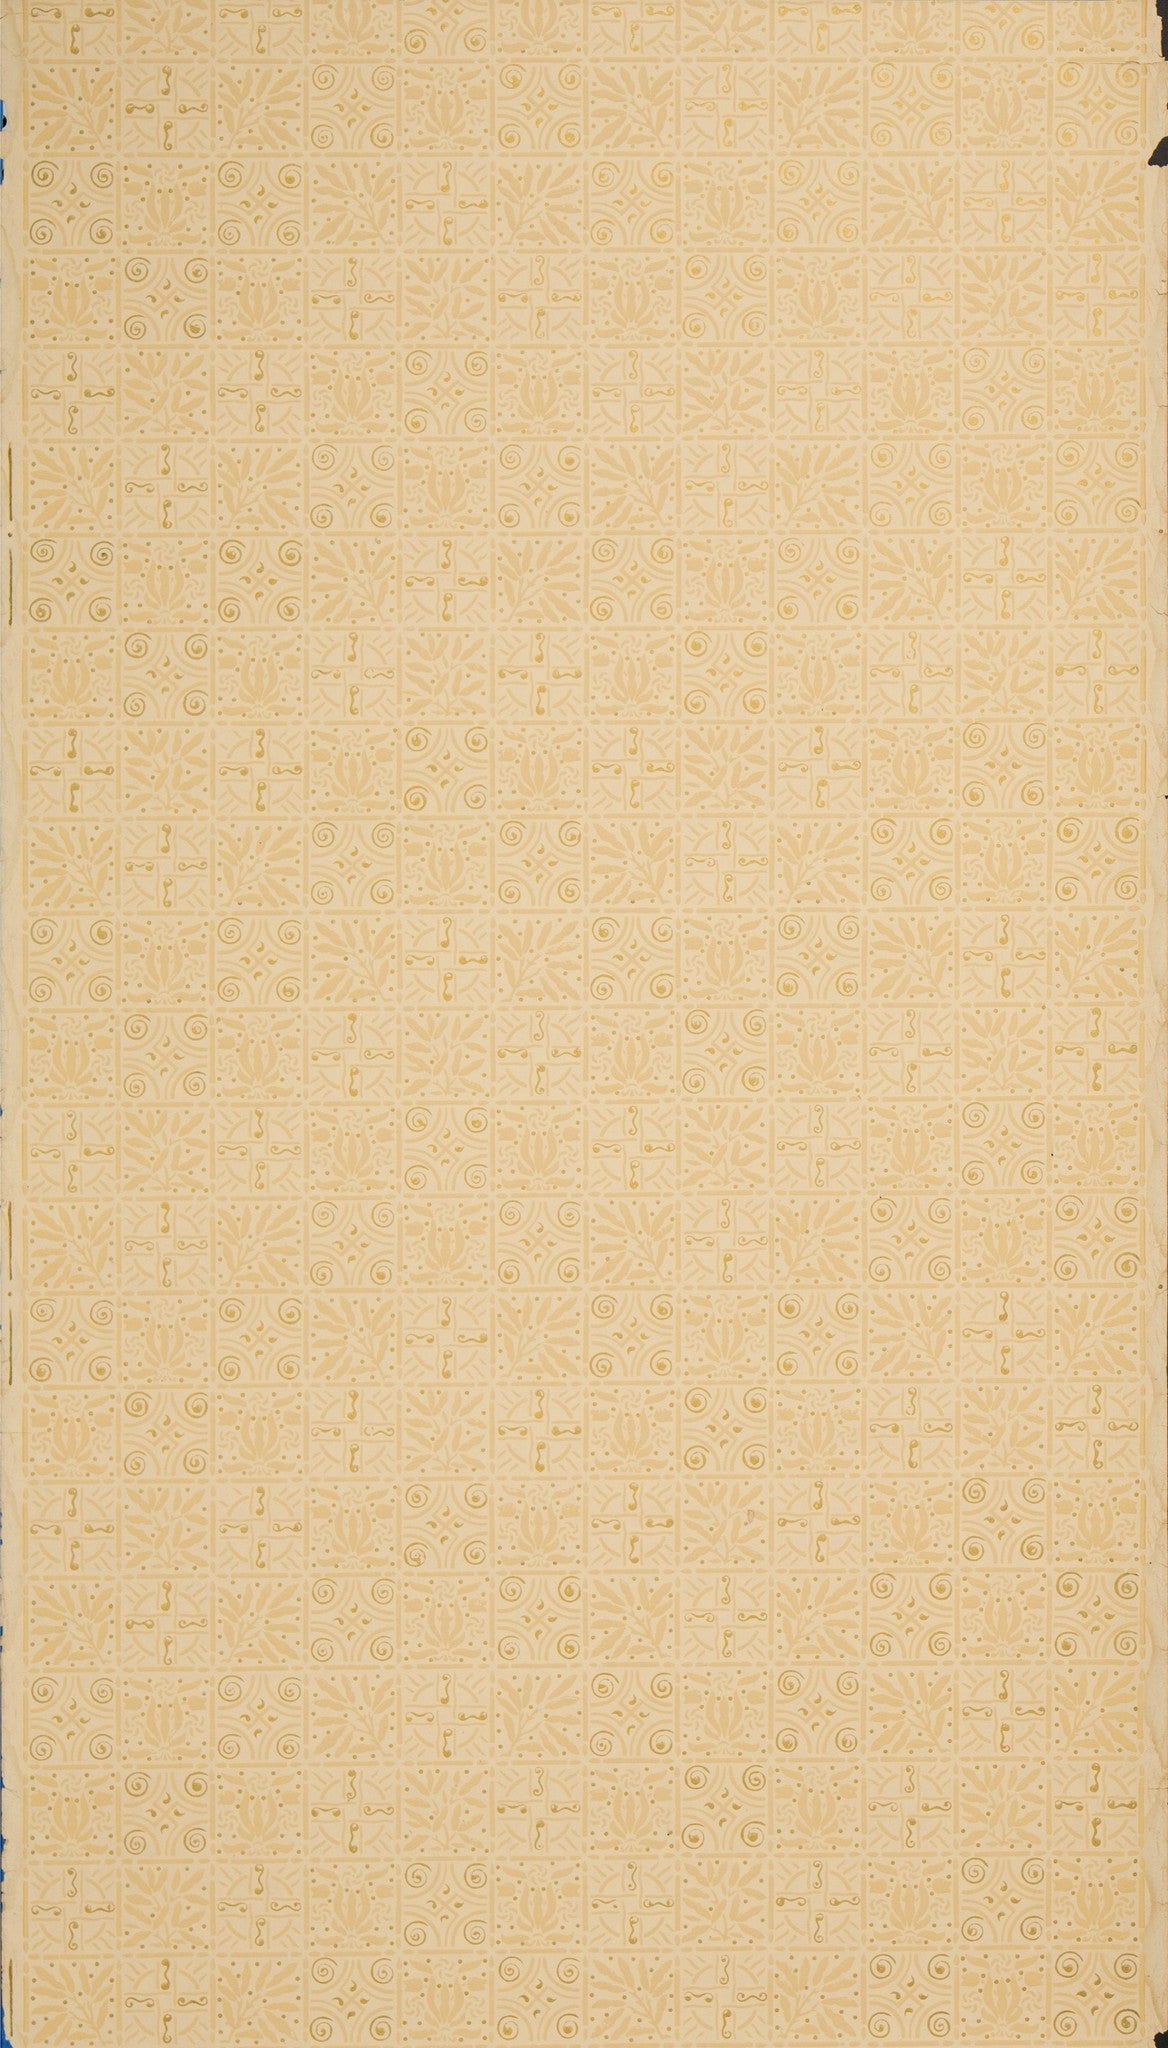 Network of Gilt Decorated Squares - Antique Wallpaper Remnant